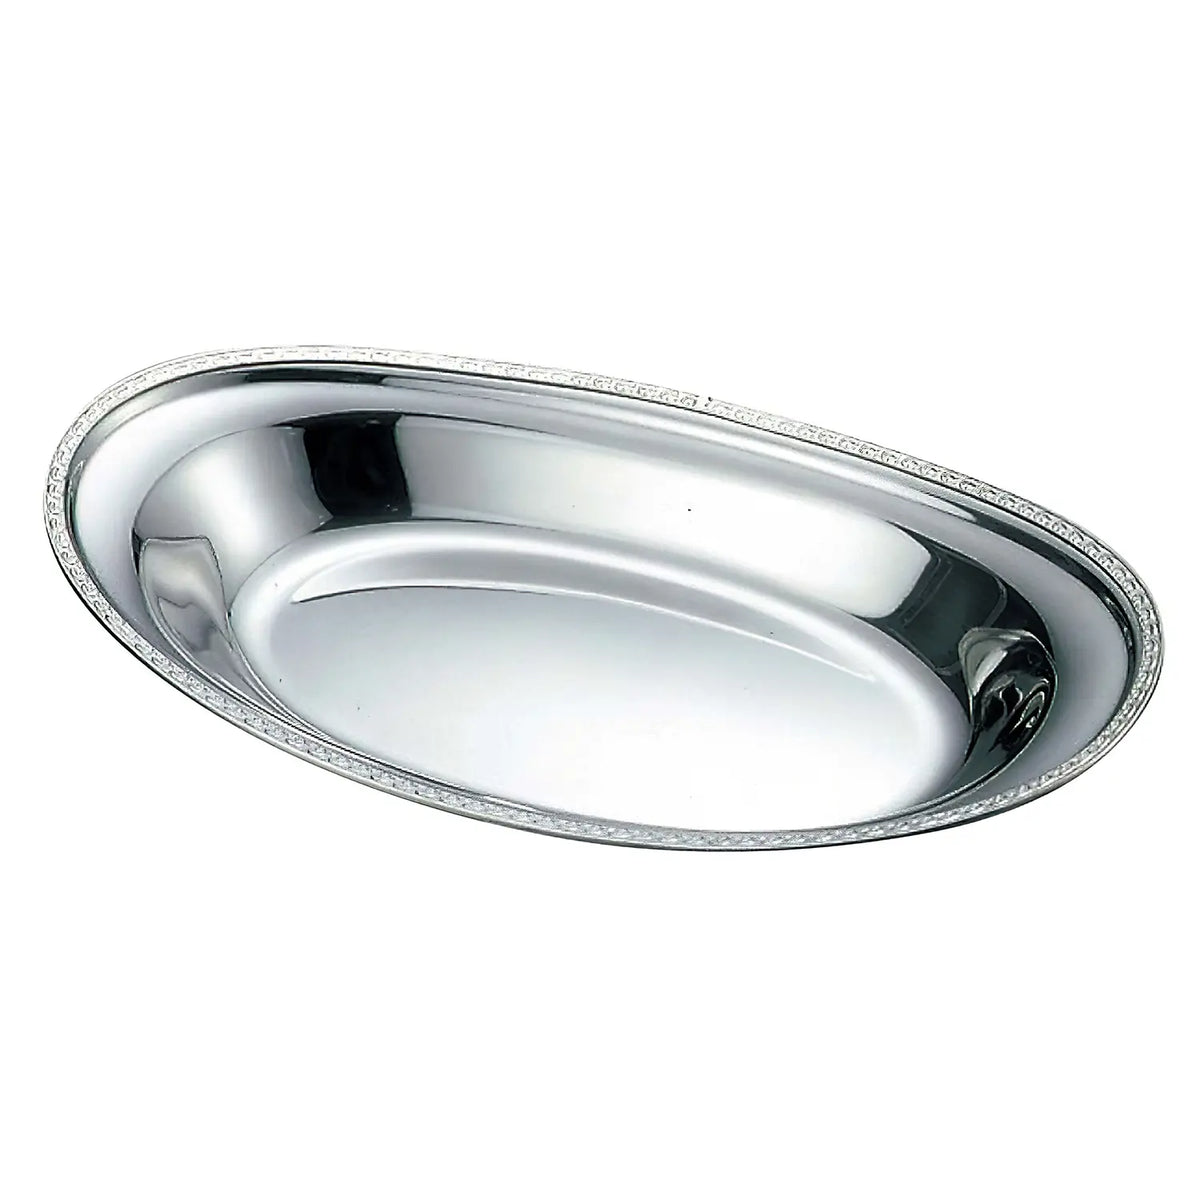 IKD Stainless Steel Curry Plate Wave Pattern